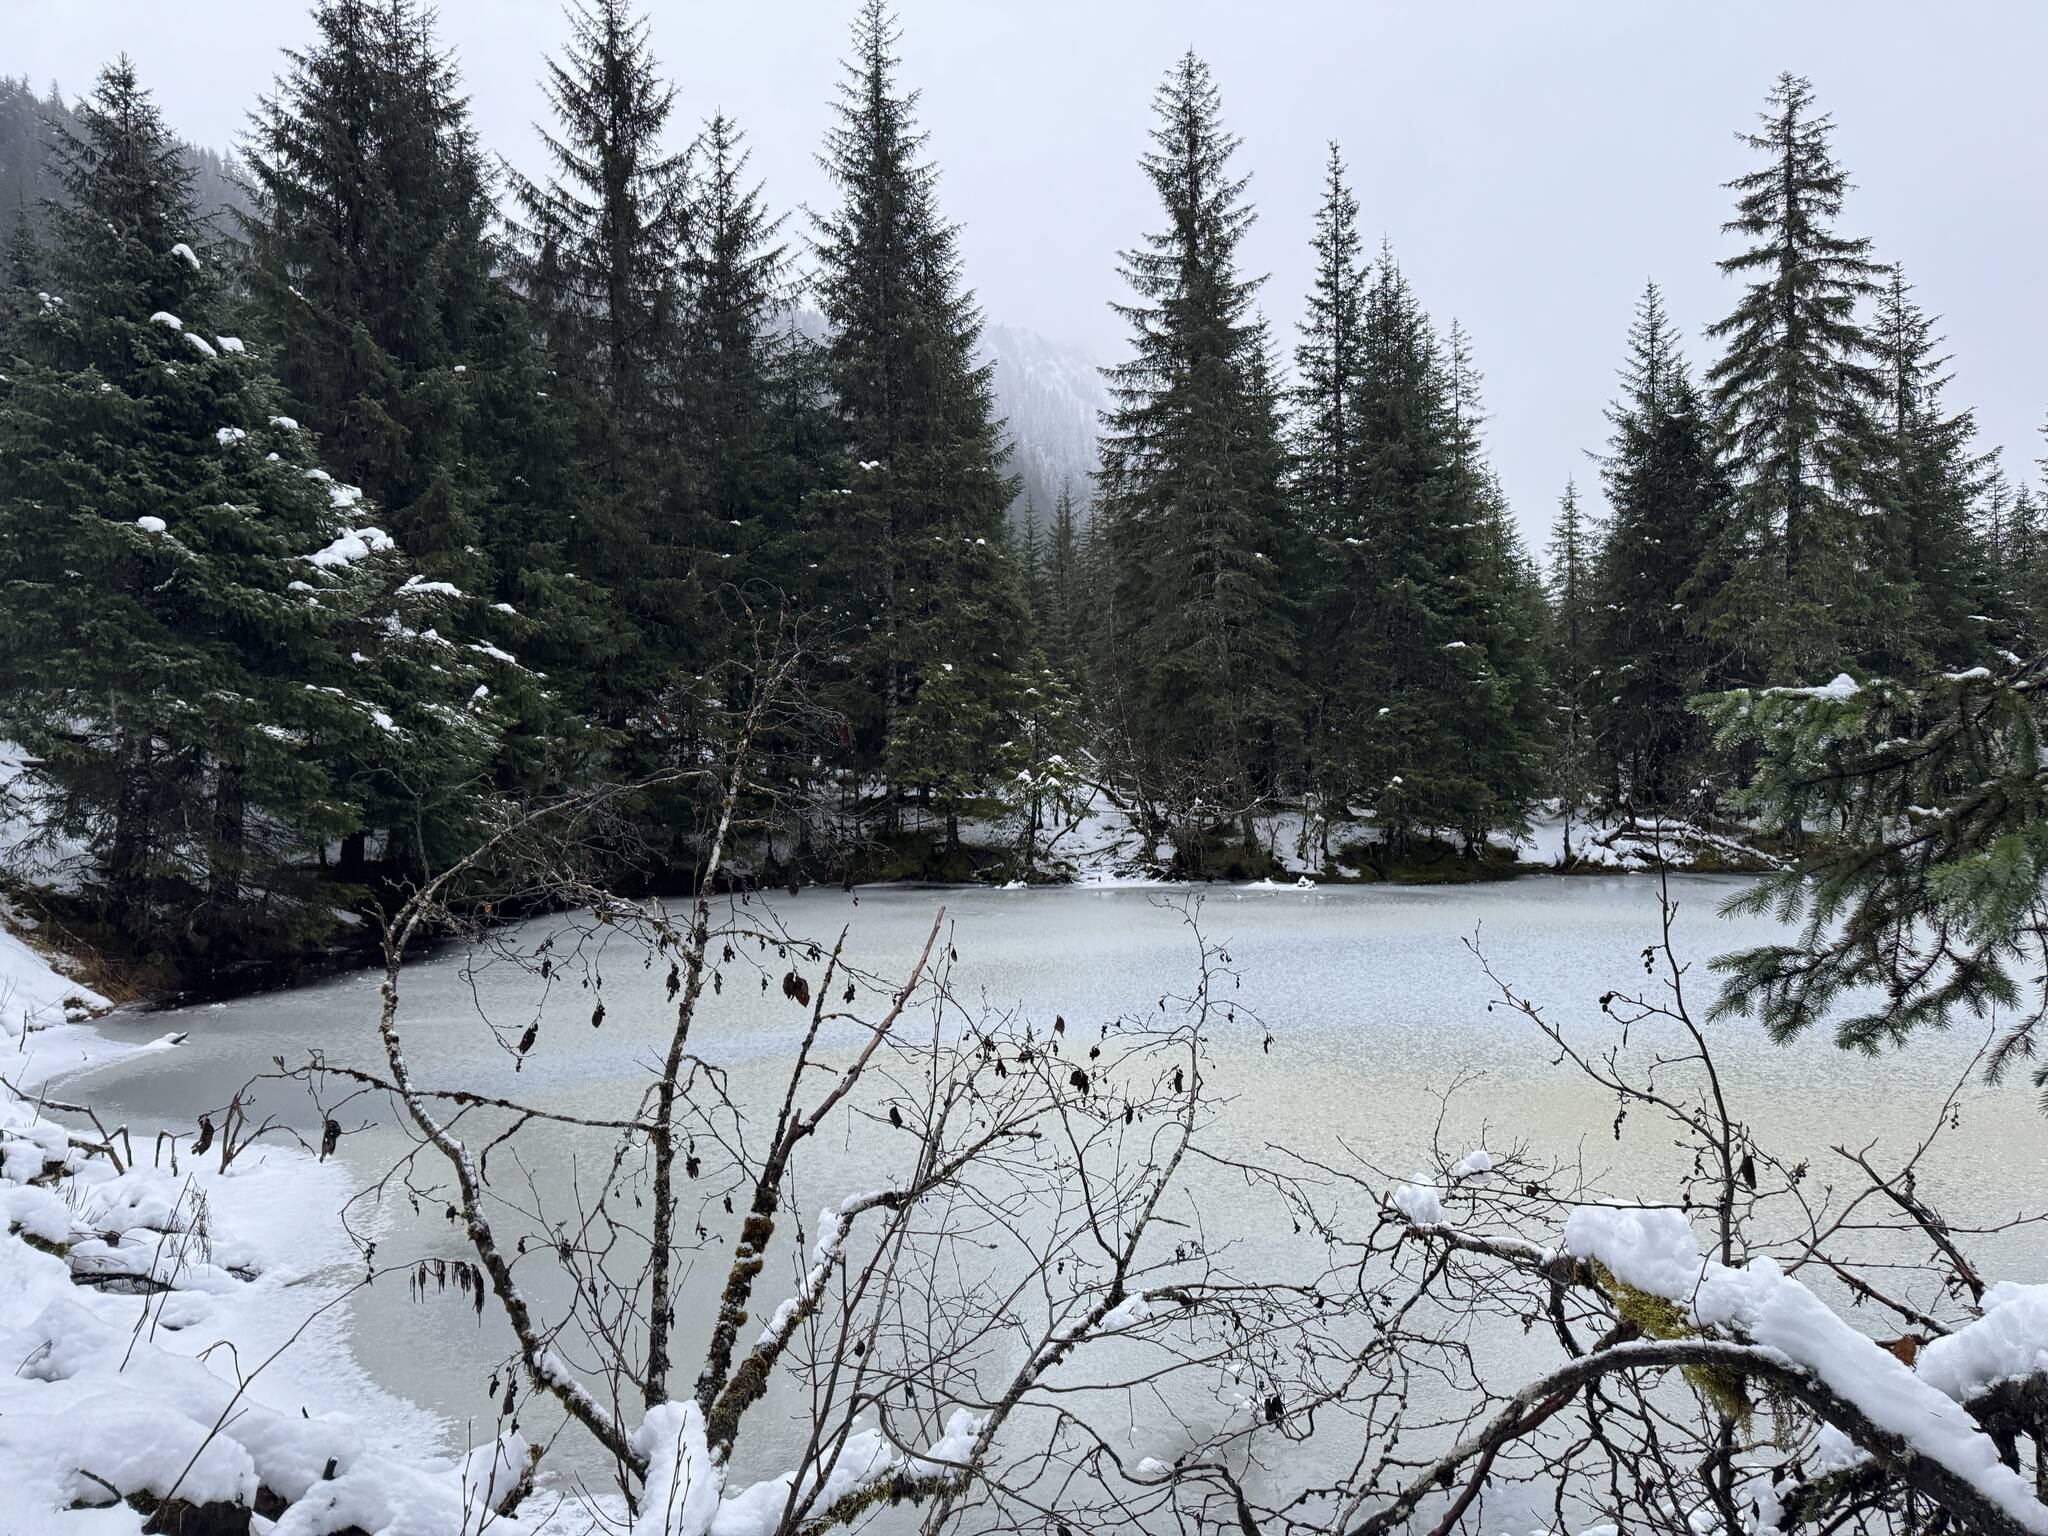 A semi-frozen pond along the Nugget Falls Trail on Dec. 24. (Photo by Deana Barajas)